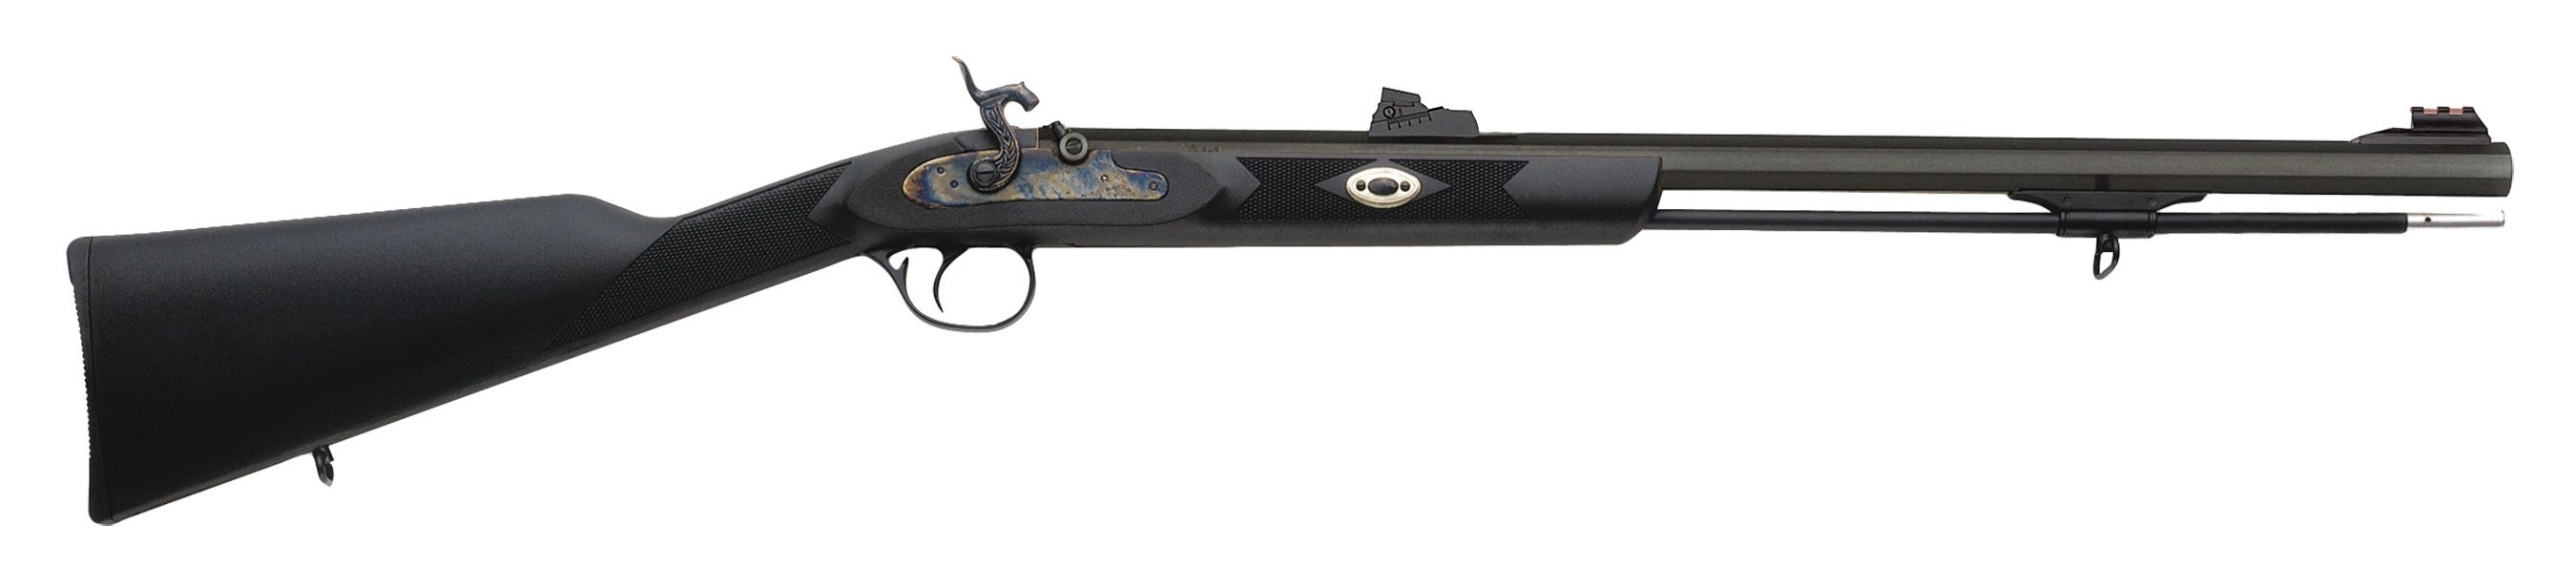 Traditions™ Deerhunter Rifle - Percussion